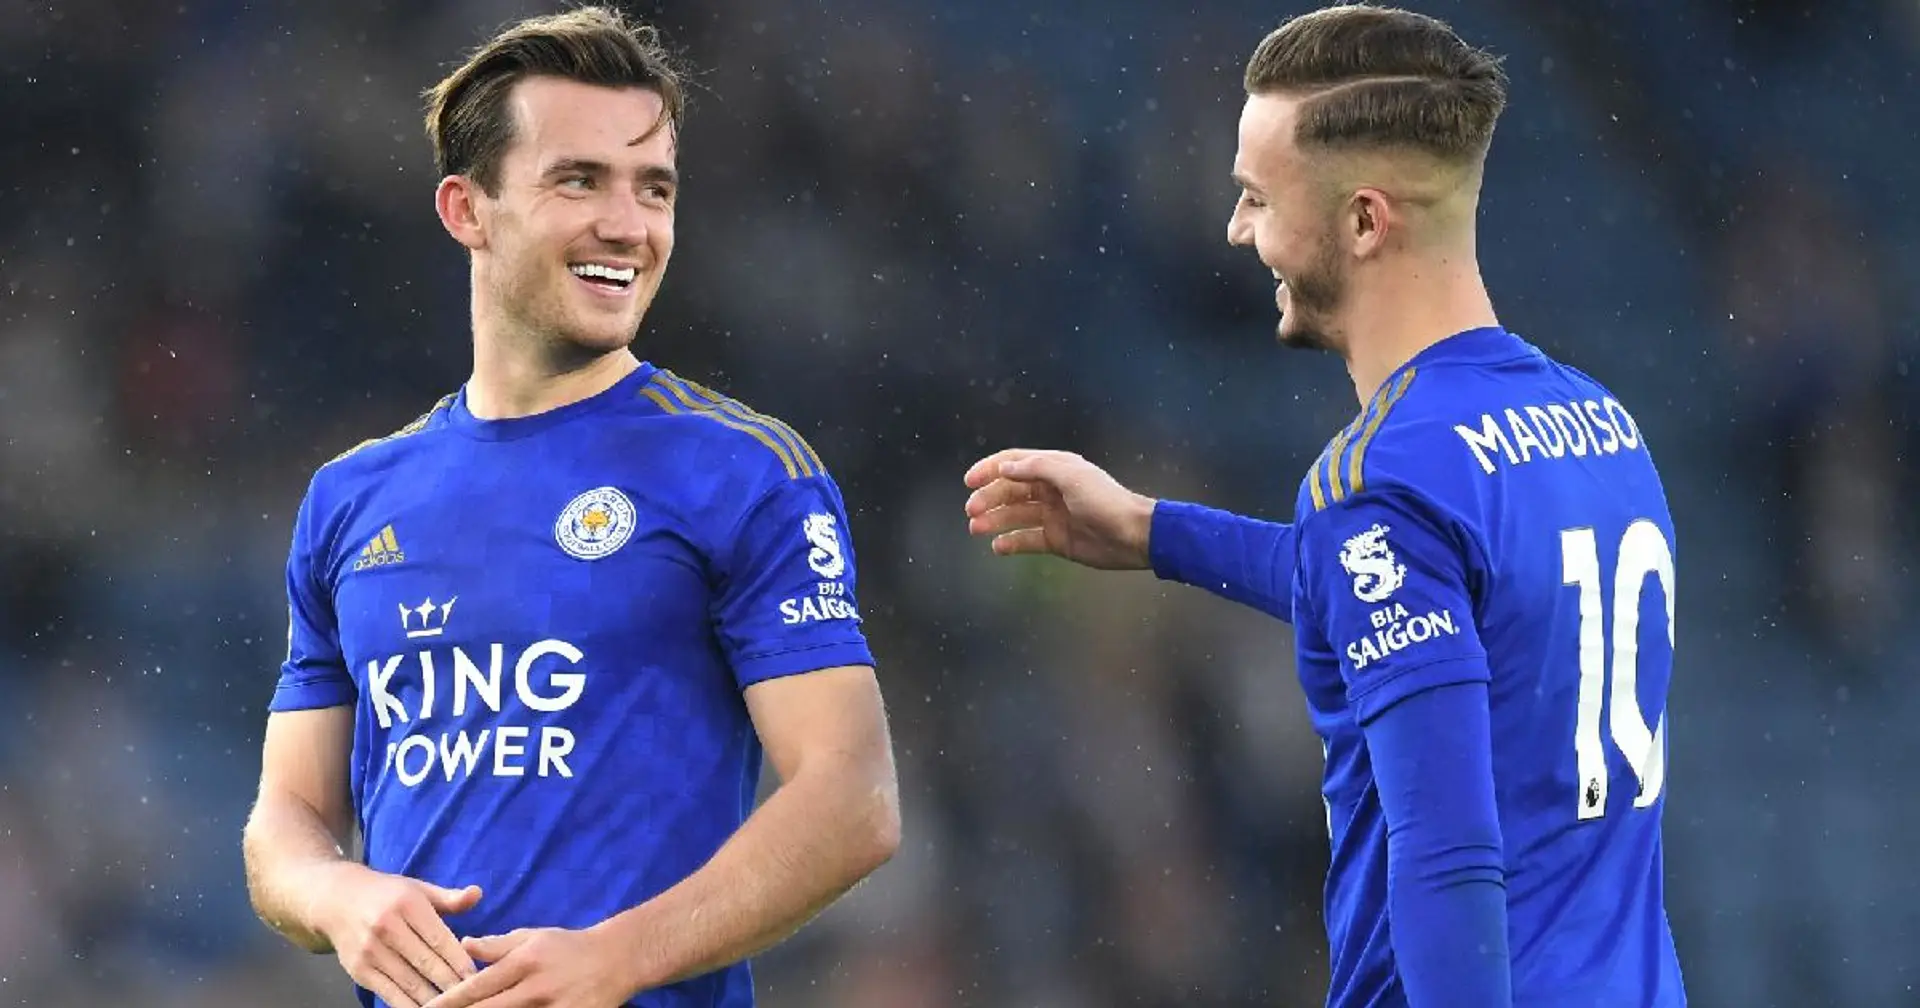 James Maddison sends emotional goodbye message to Ben Chilwell (video)